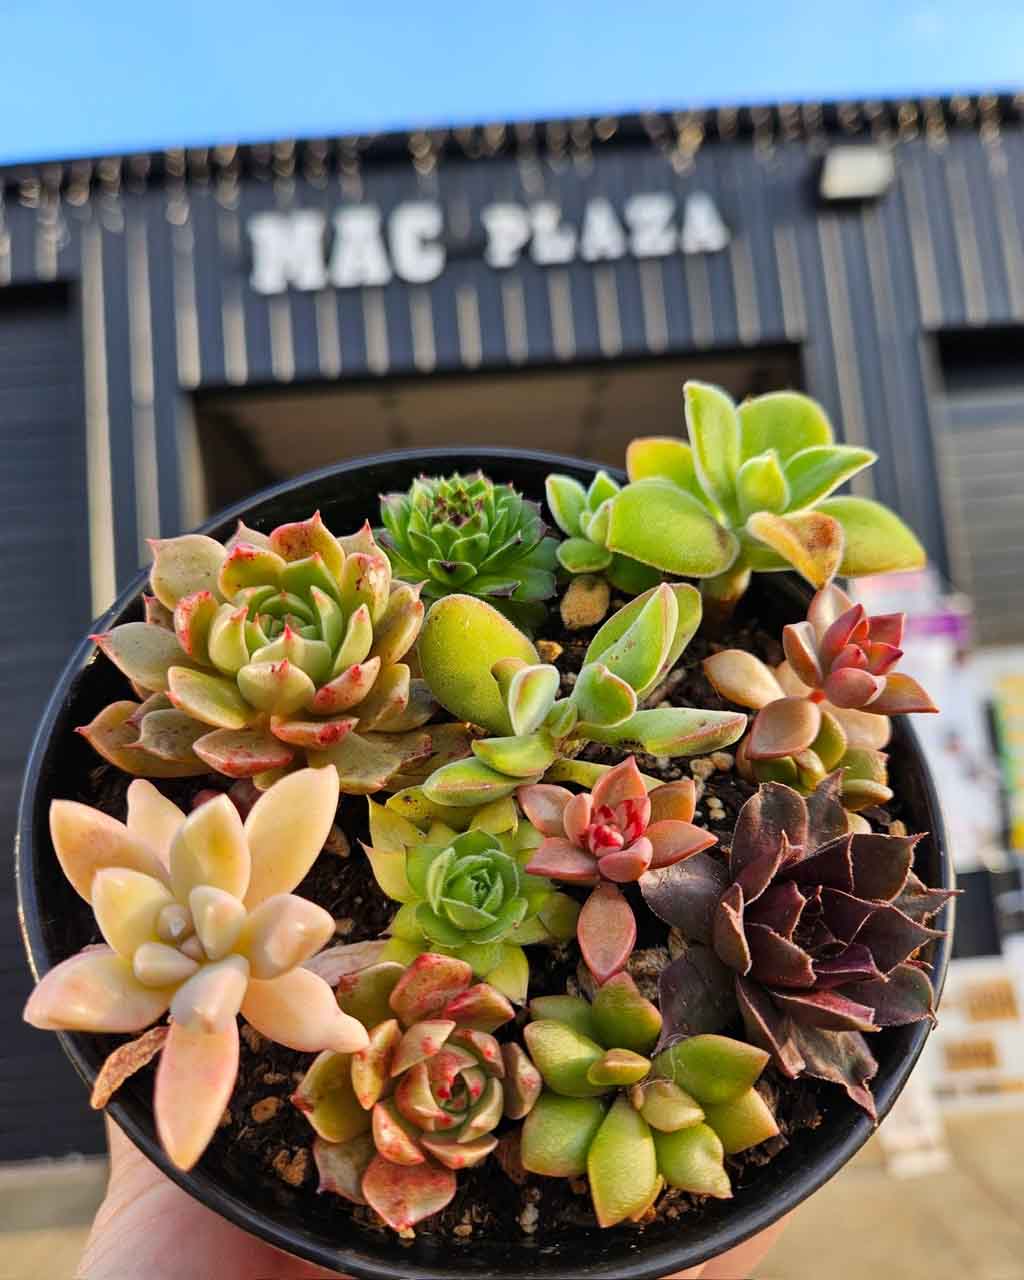 Mac Plaza plant for sale